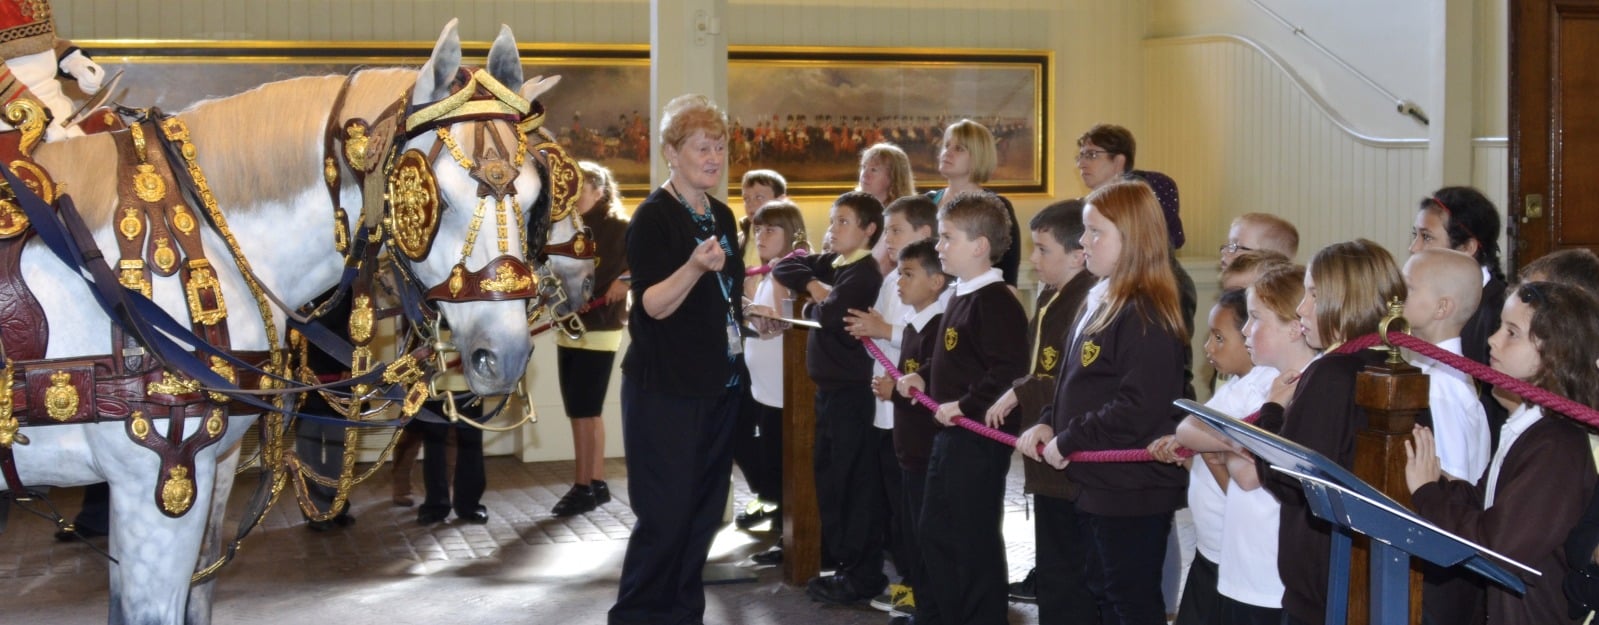 Pupils visit the Gold State Coach at the Royal Mews